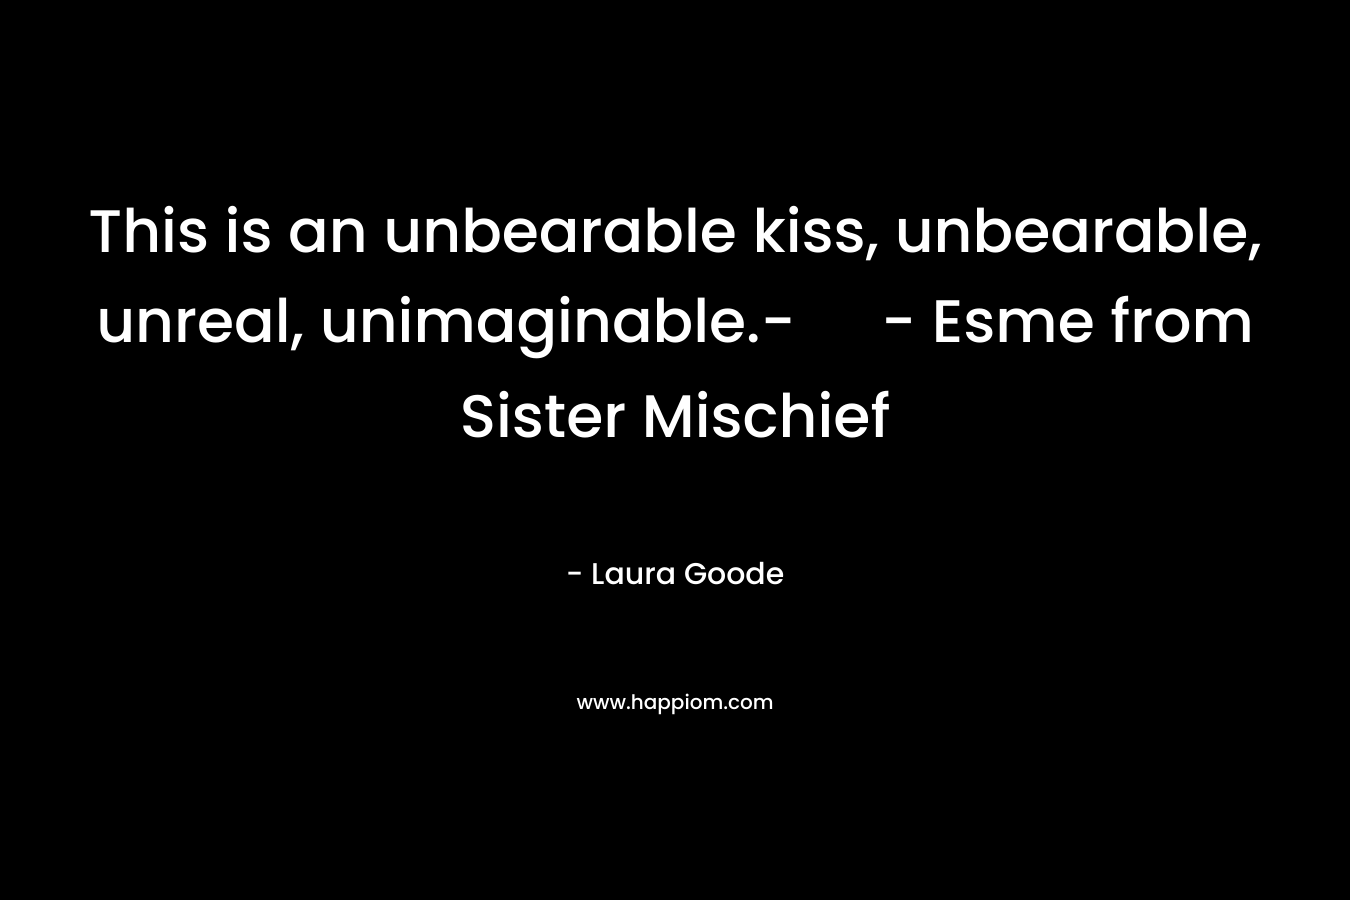 This is an unbearable kiss, unbearable, unreal, unimaginable.- - Esme from Sister Mischief